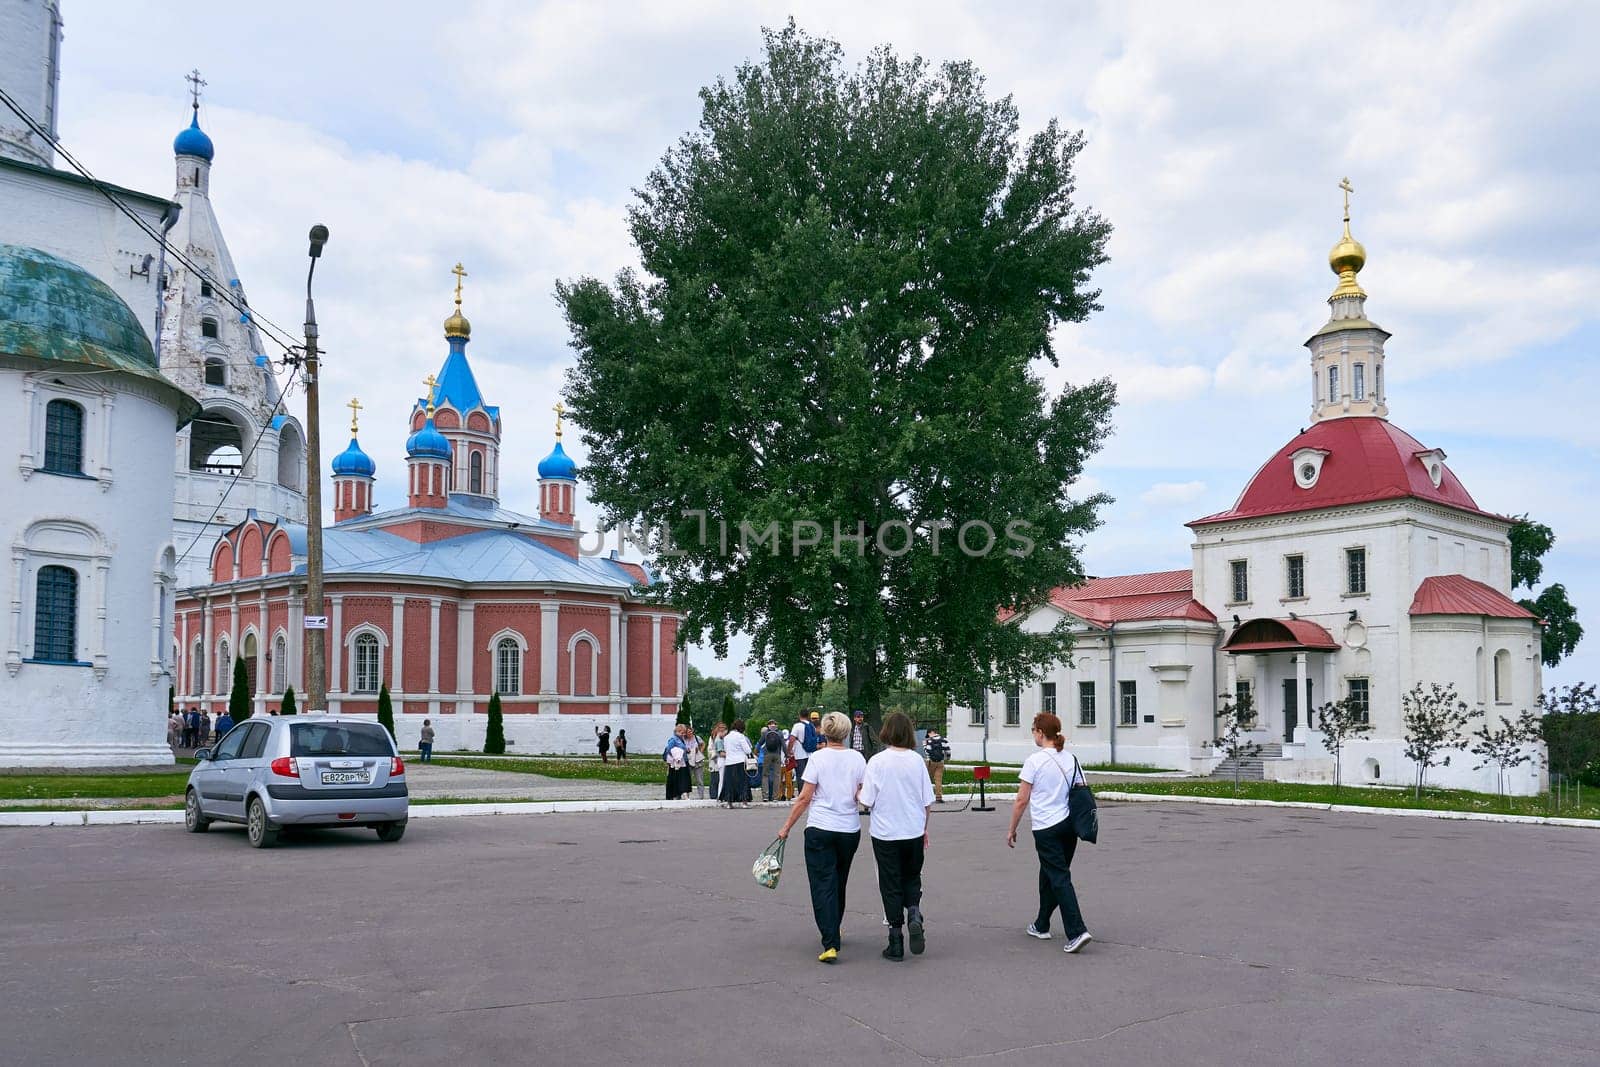 Kolomna, Russia - May 30, 2023: Tourists on the territory of the Kolomna Kremlin. Orthodox churches and old Russian architecture